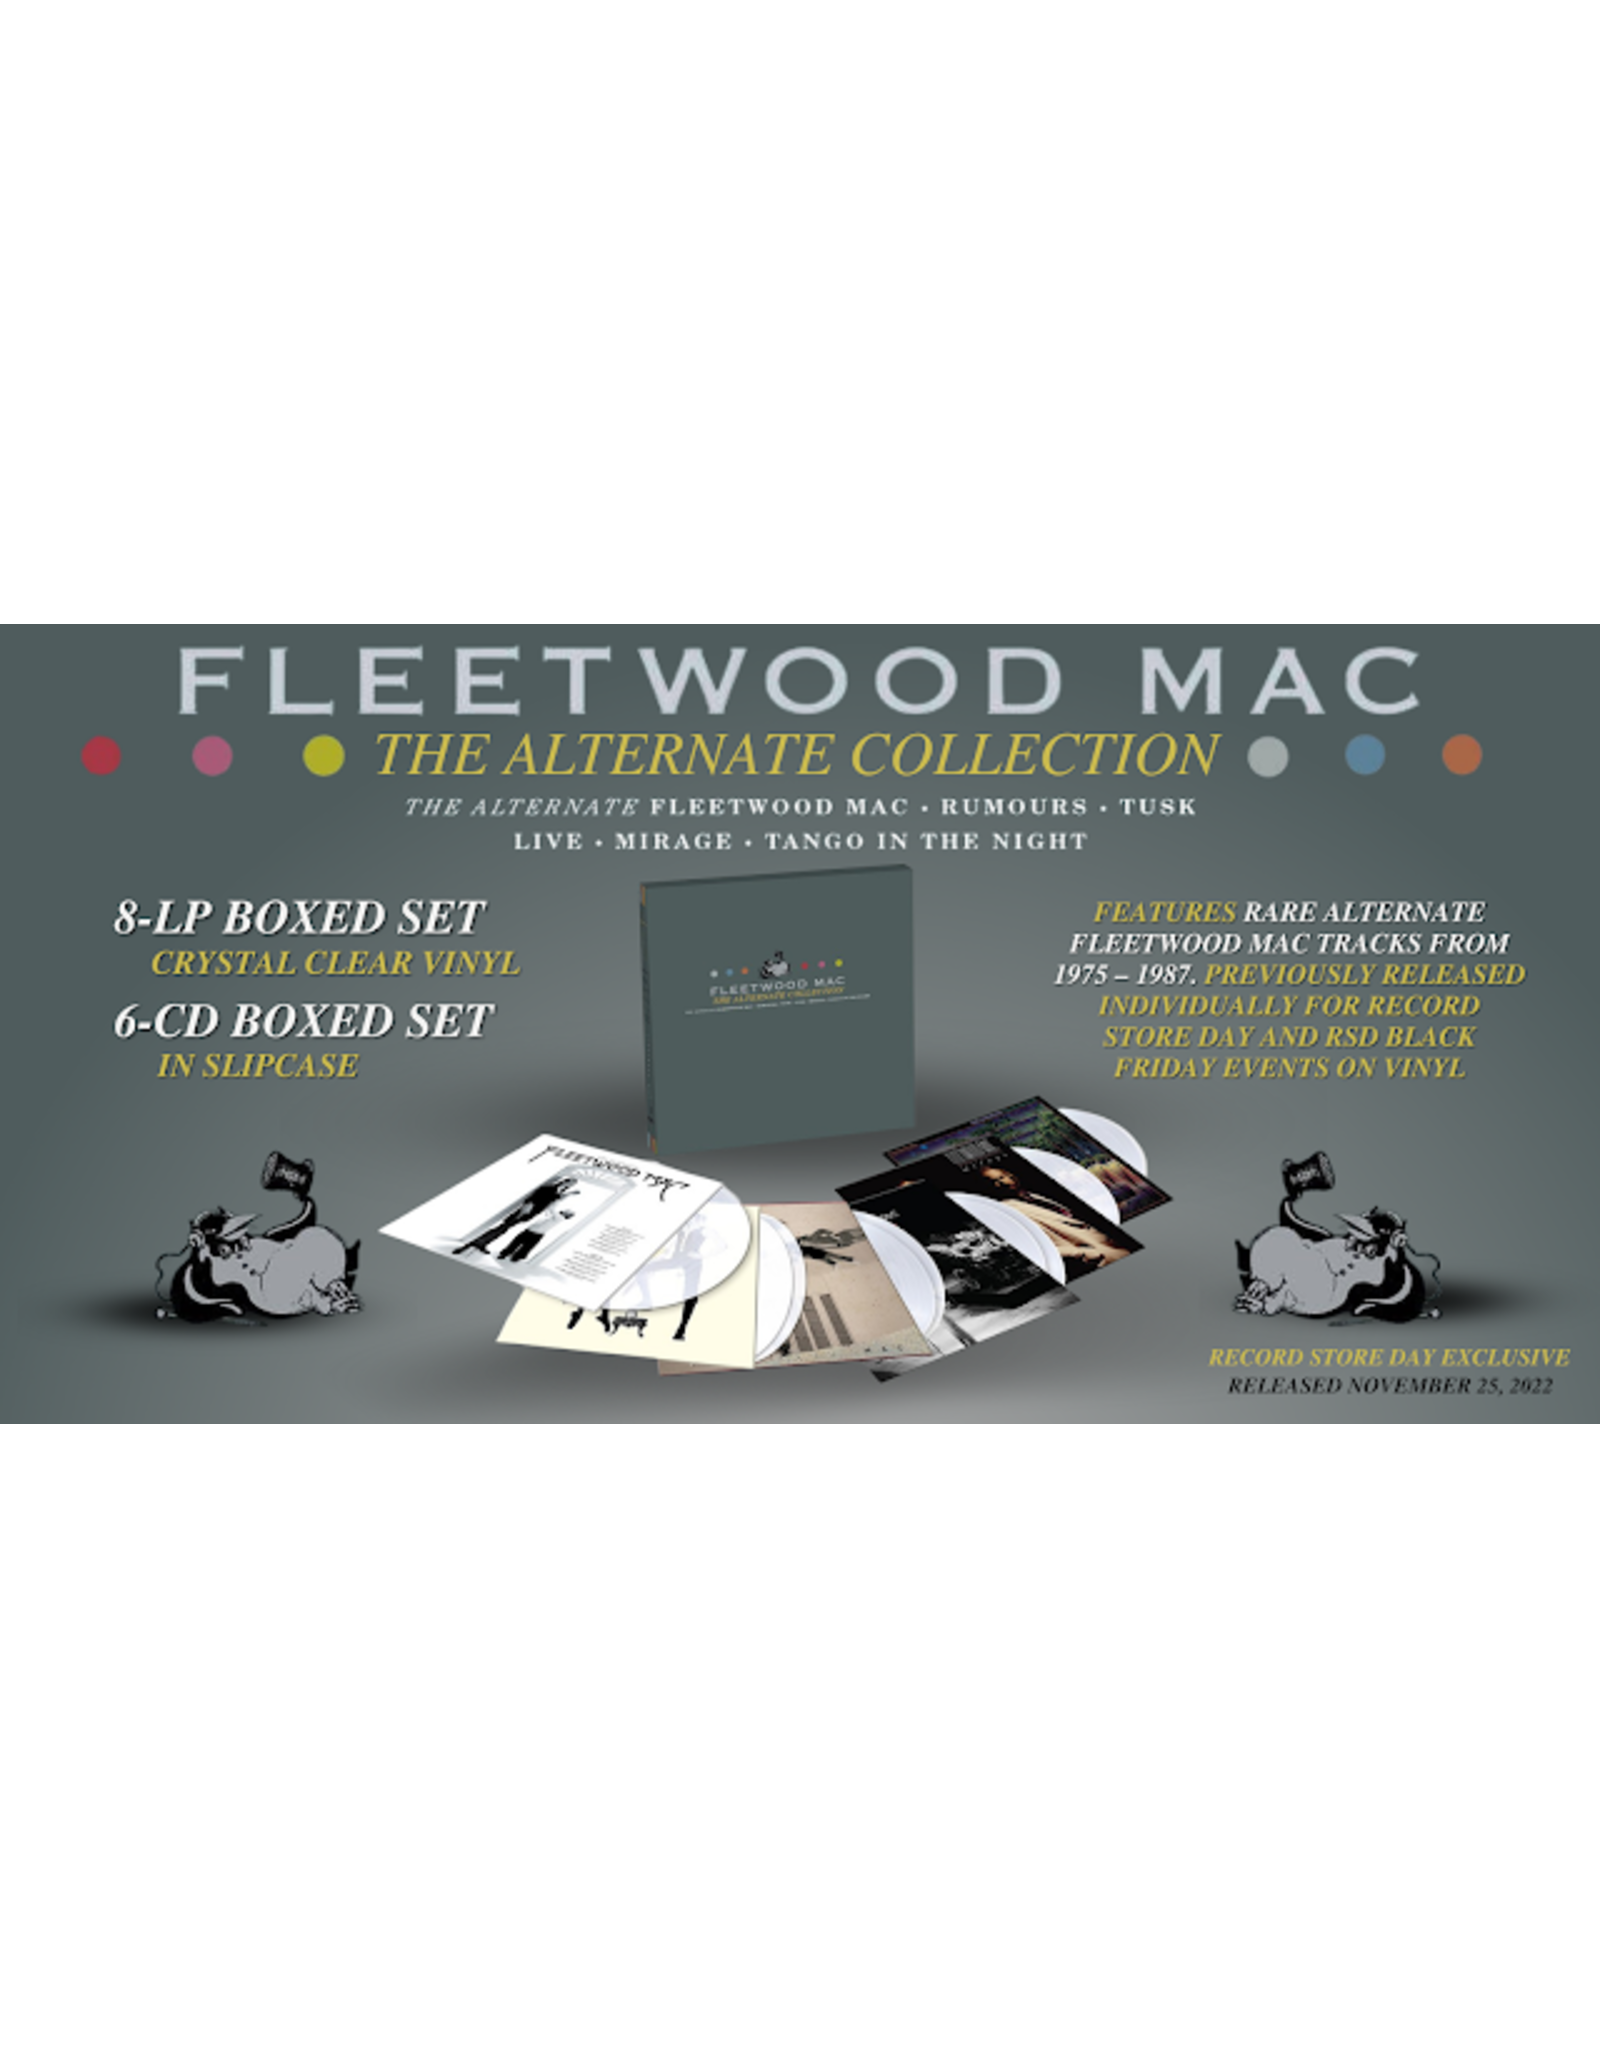 Fleetwood Mac The Alternate Collection (Record Store Day) [Vinyl